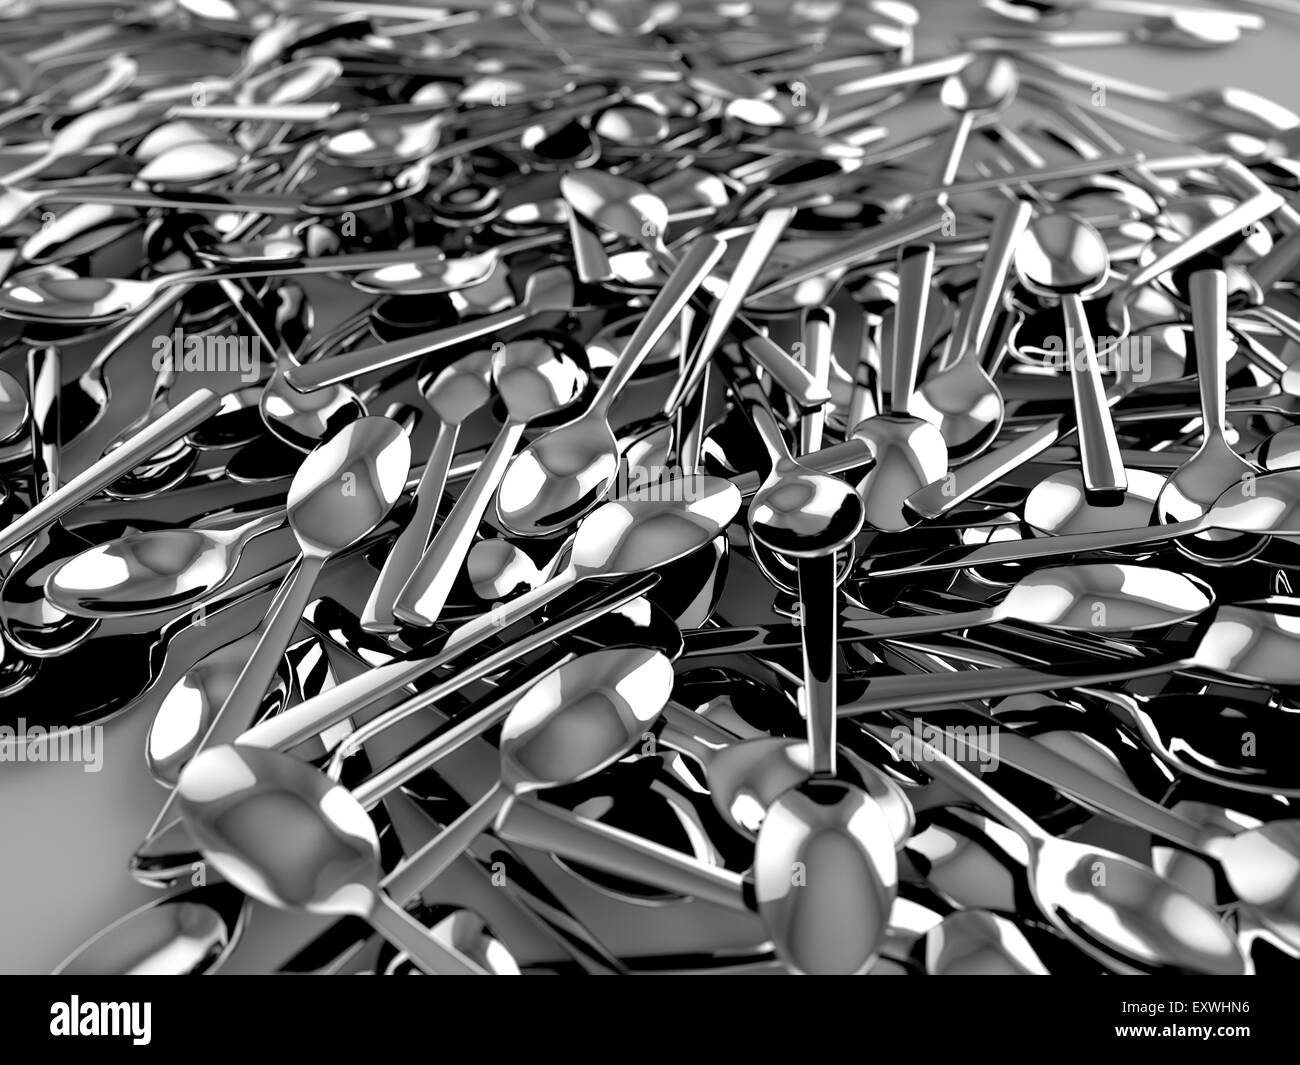 A pile of shiny spoons Stock Photo